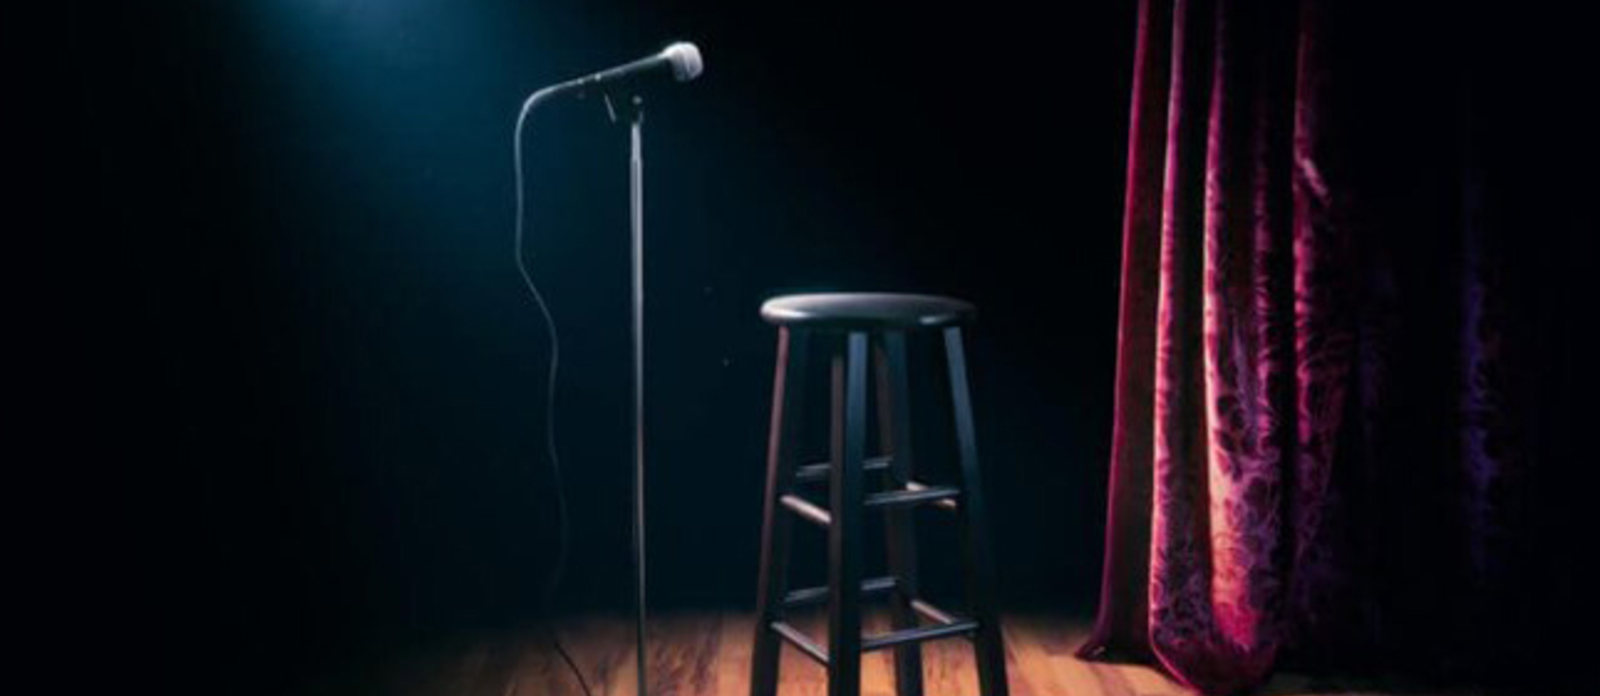 Stand up: Open mic